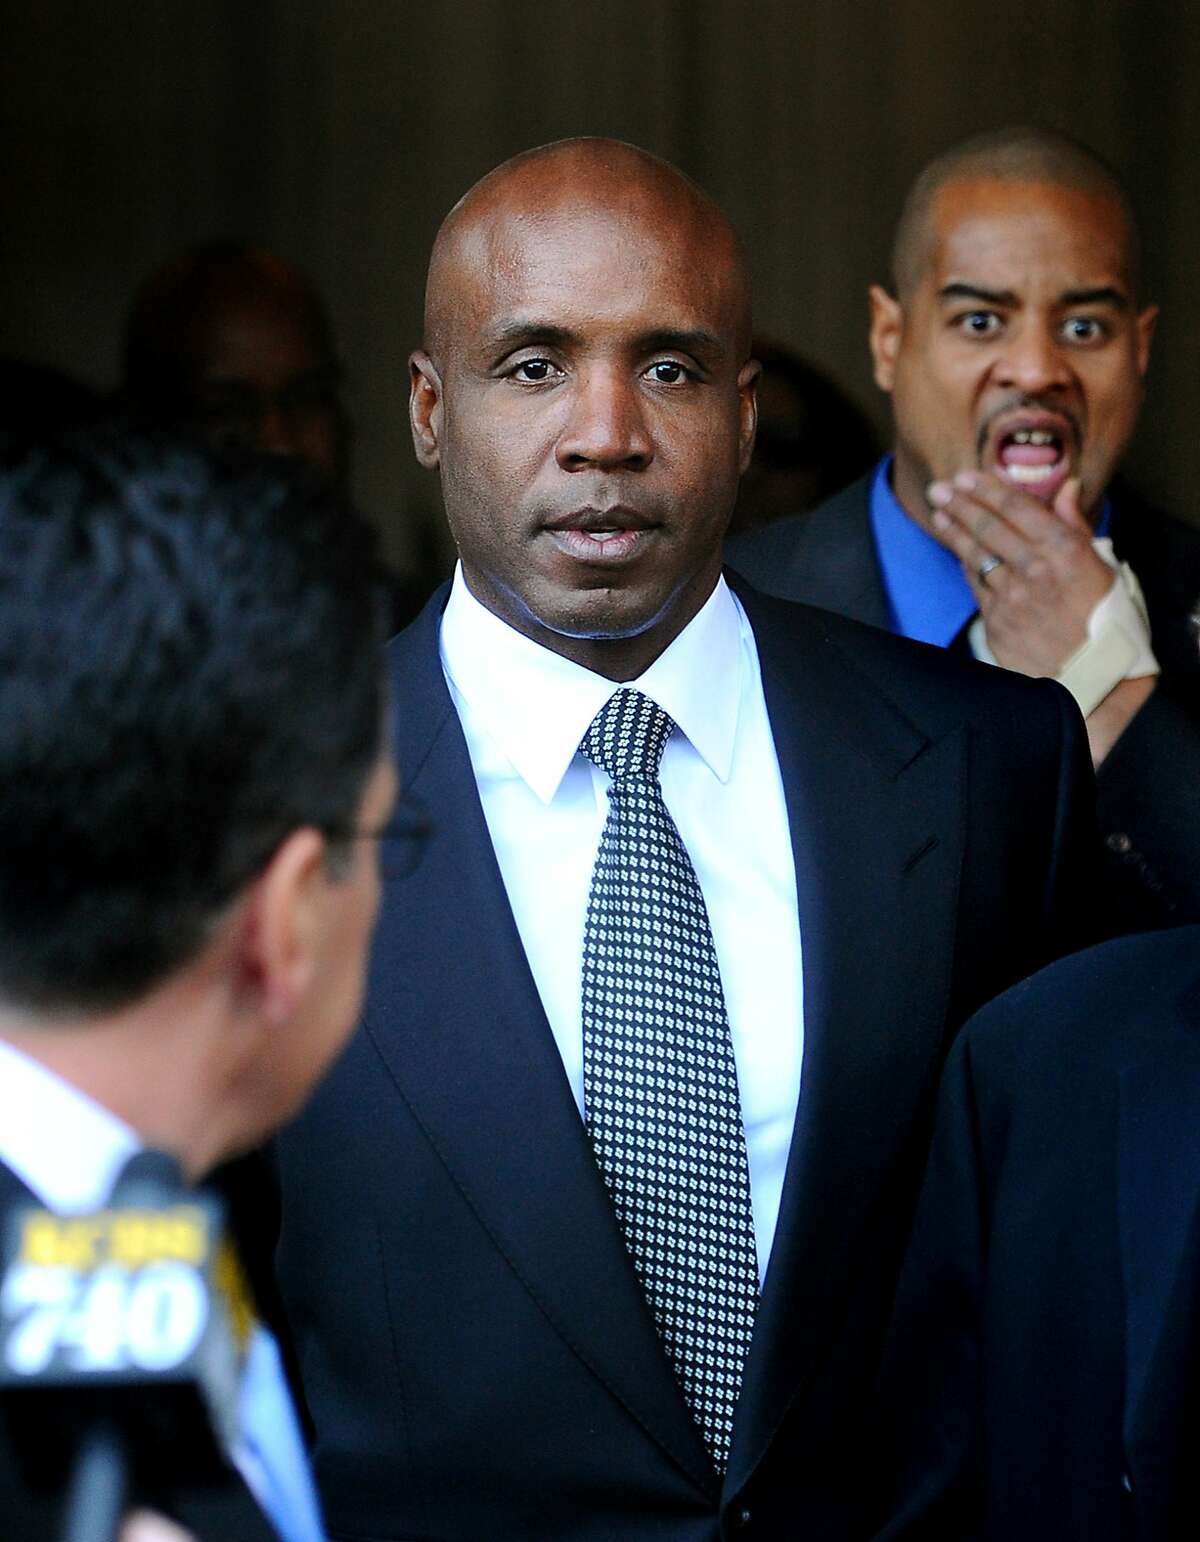 his Dec. 16, 2011 file photo shows former baseball player Barry Bonds leaving federal court after being sentenced for obstructing justice in a government steroids investigation, in San Francisco.